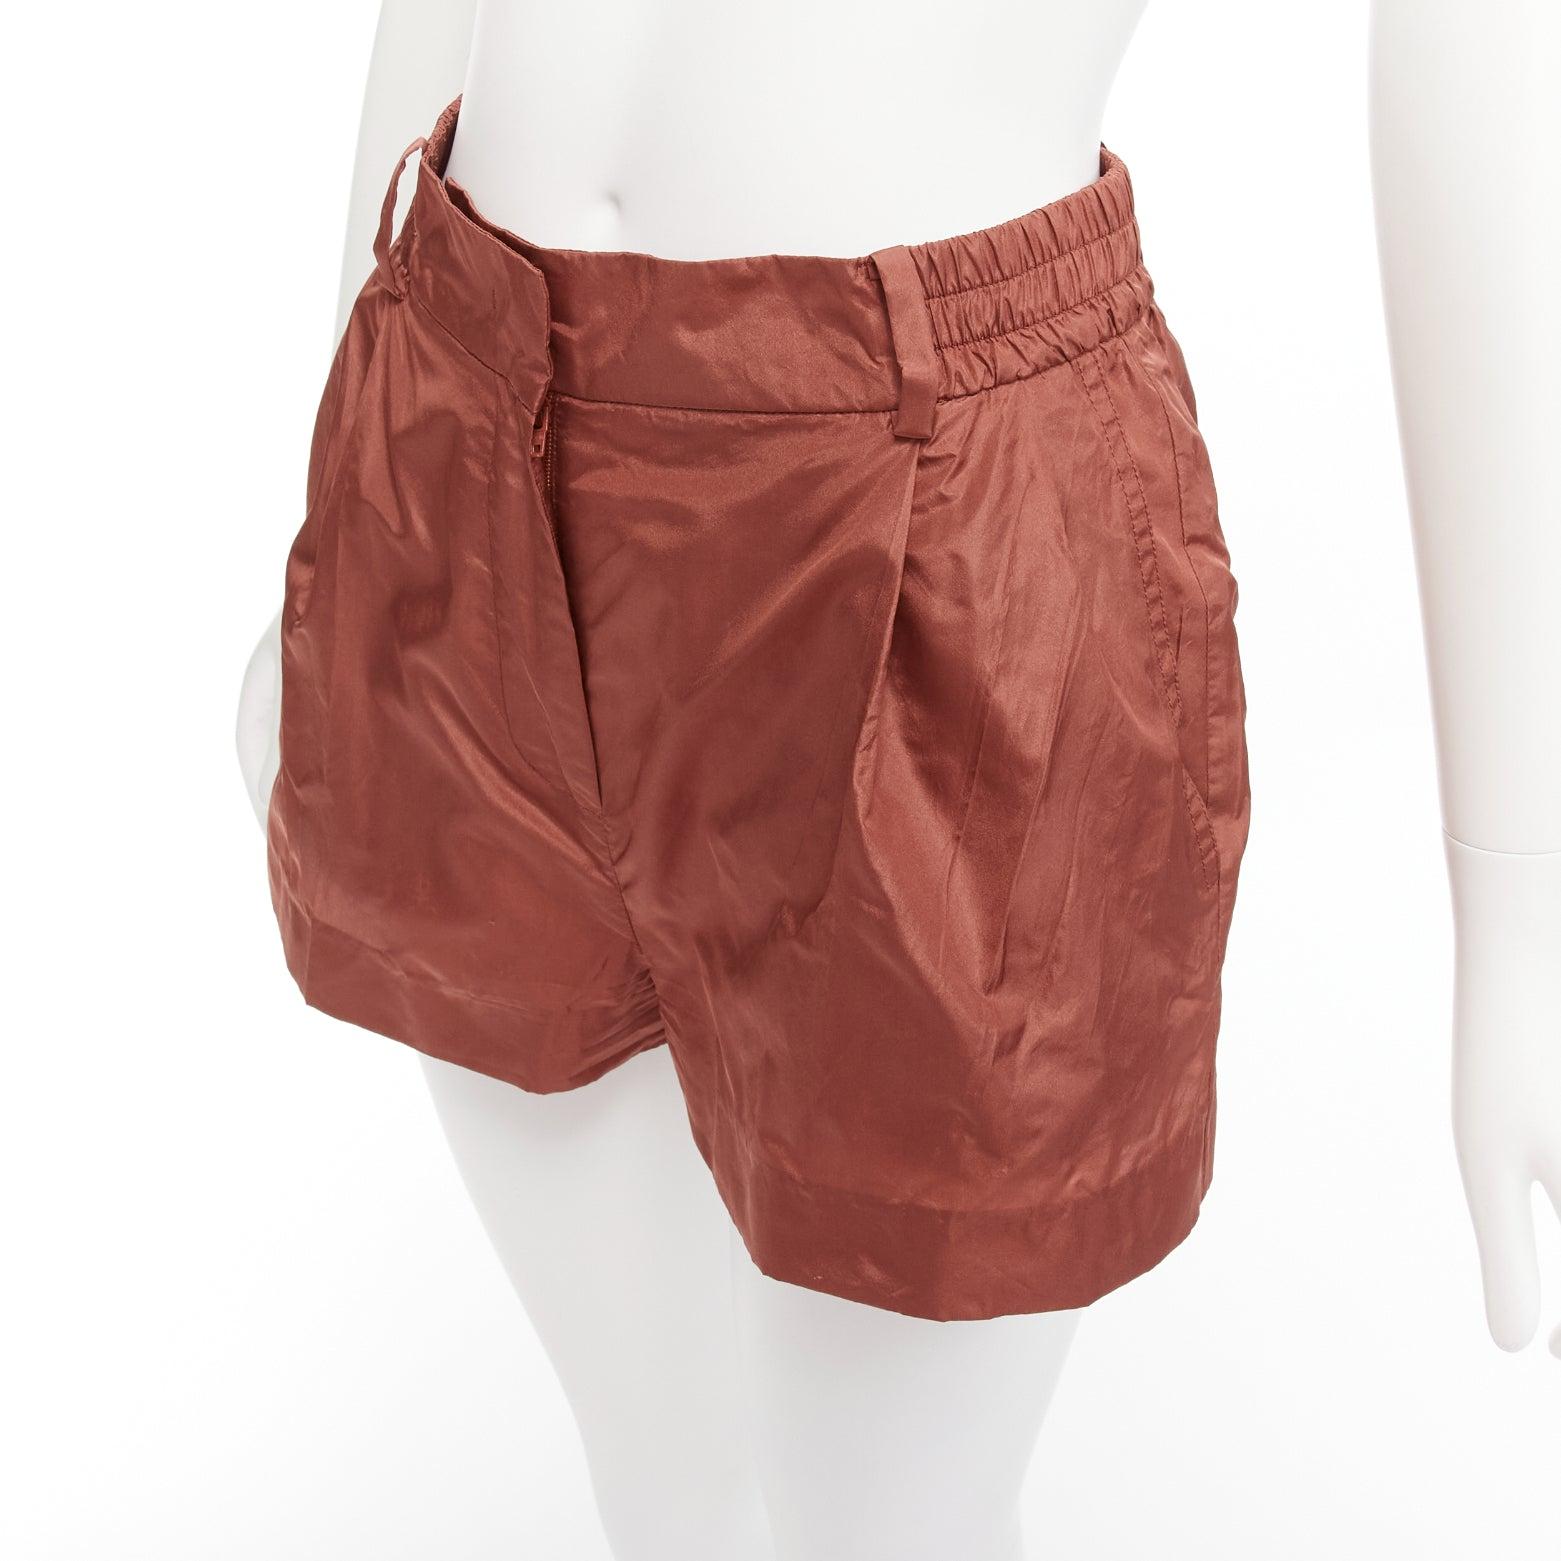 VALENTINO 2021 Piccioli 100% silk brick red high waisted dress shorts IT36 XXS
Reference: AAWC/A00878
Brand: Valentino
Designer: Pier Paolo Piccioli
Collection: 2021
Material: Silk
Color: Red
Pattern: Solid
Closure: Zip Fly
Extra Details: Darted